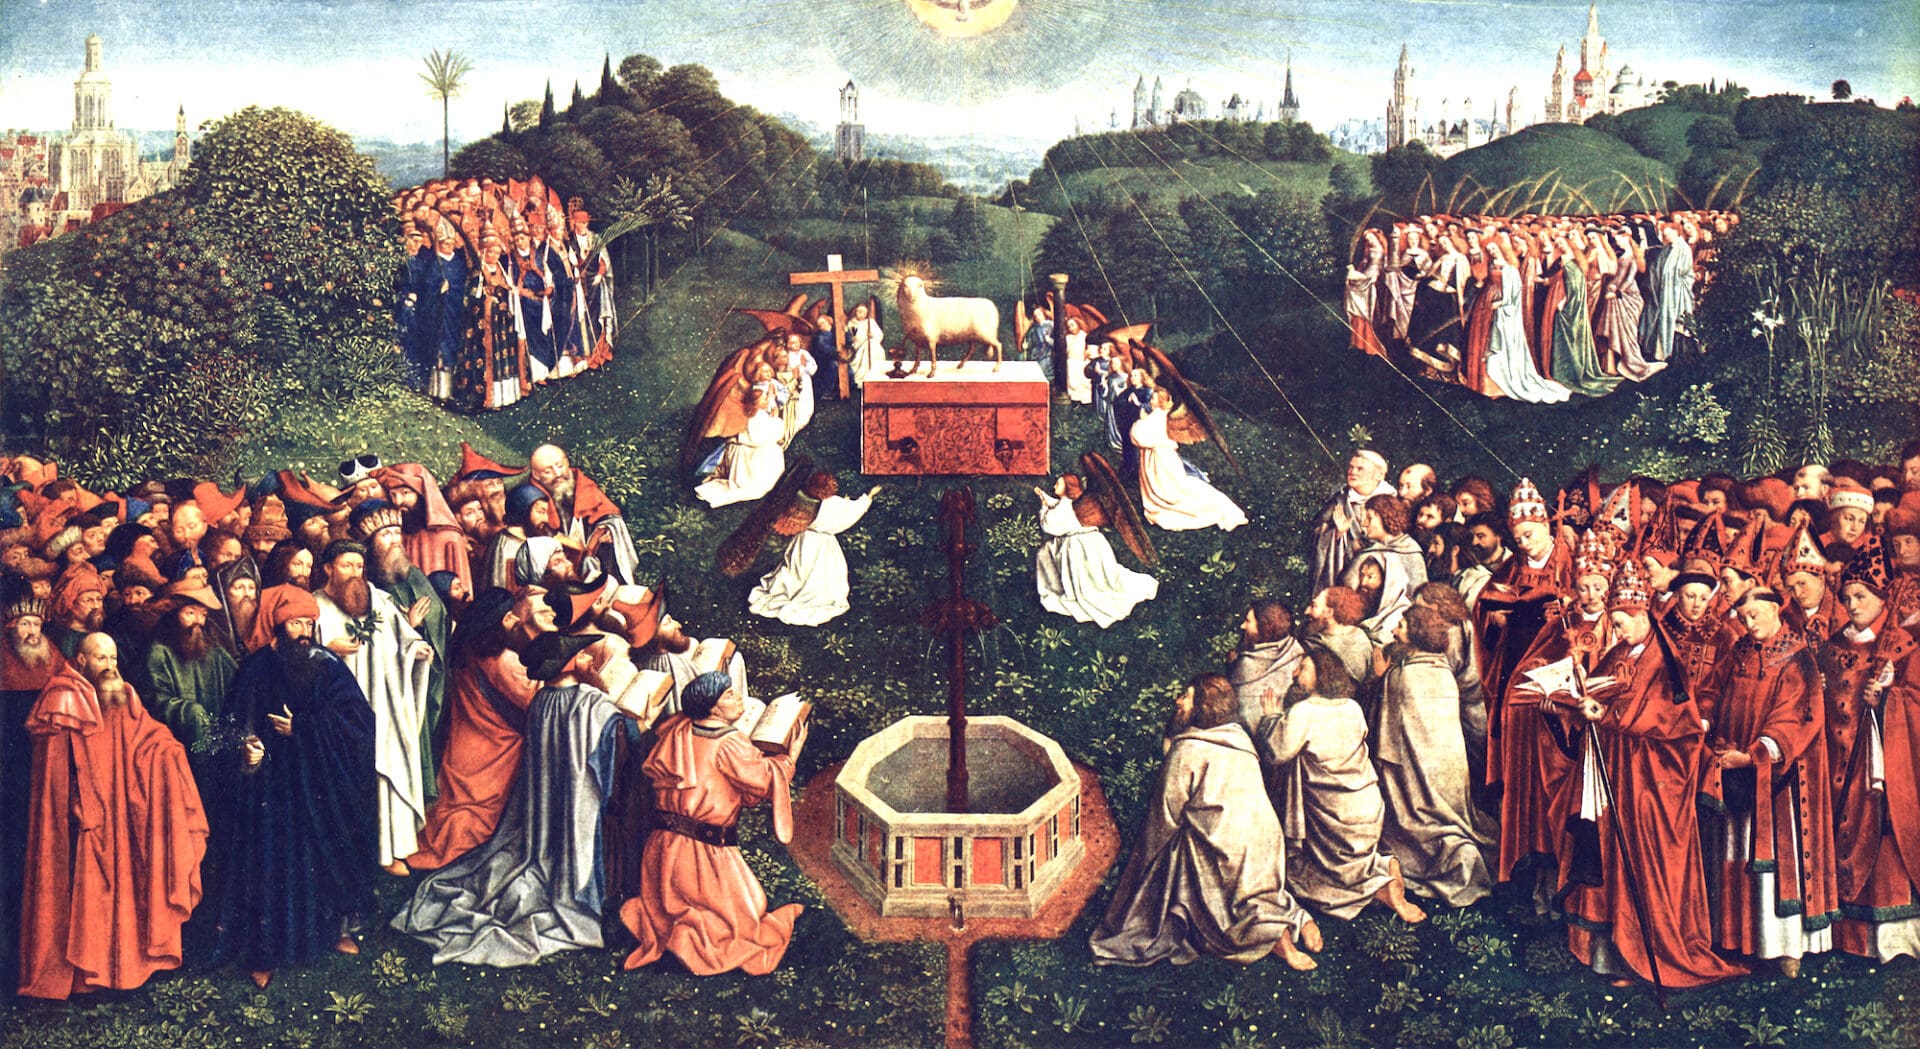 The Ghent Altarpiece Speaks: David Clayton Reviews Magnificat’s The Adoration of the Mystic Lamb